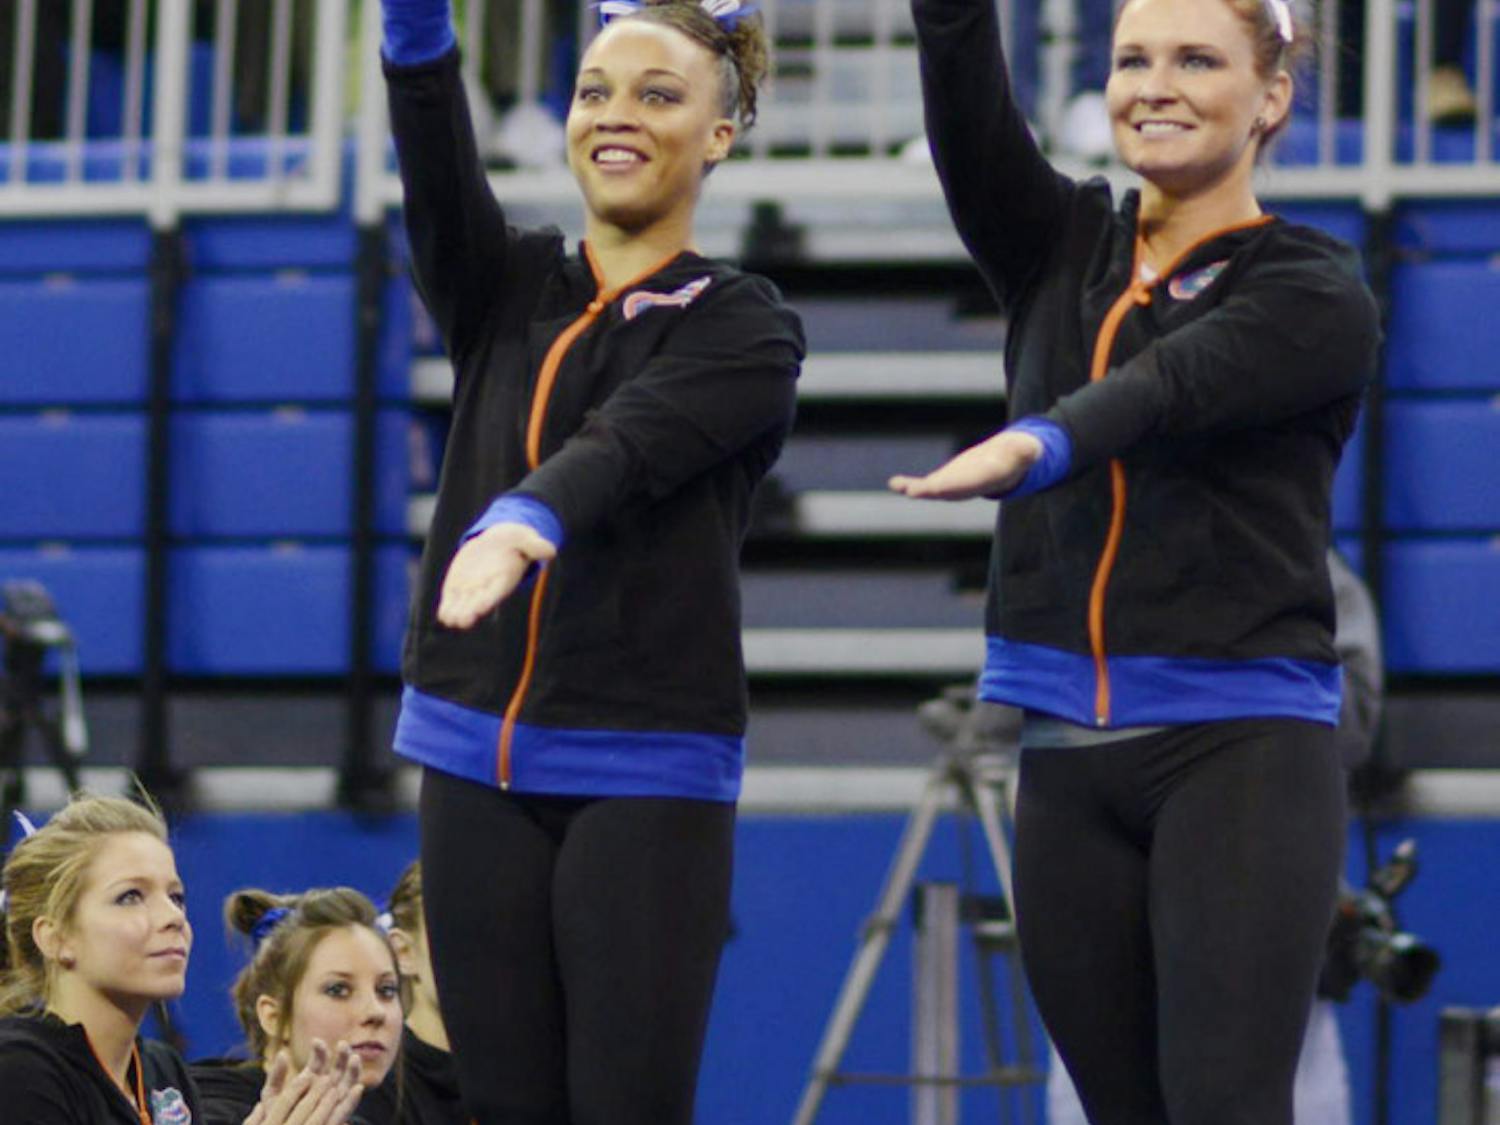 Bridget Sloan and Kytra Hunter celebrate following Florida’s match against Georgia on Jan. 24 in the O’Connell Center.